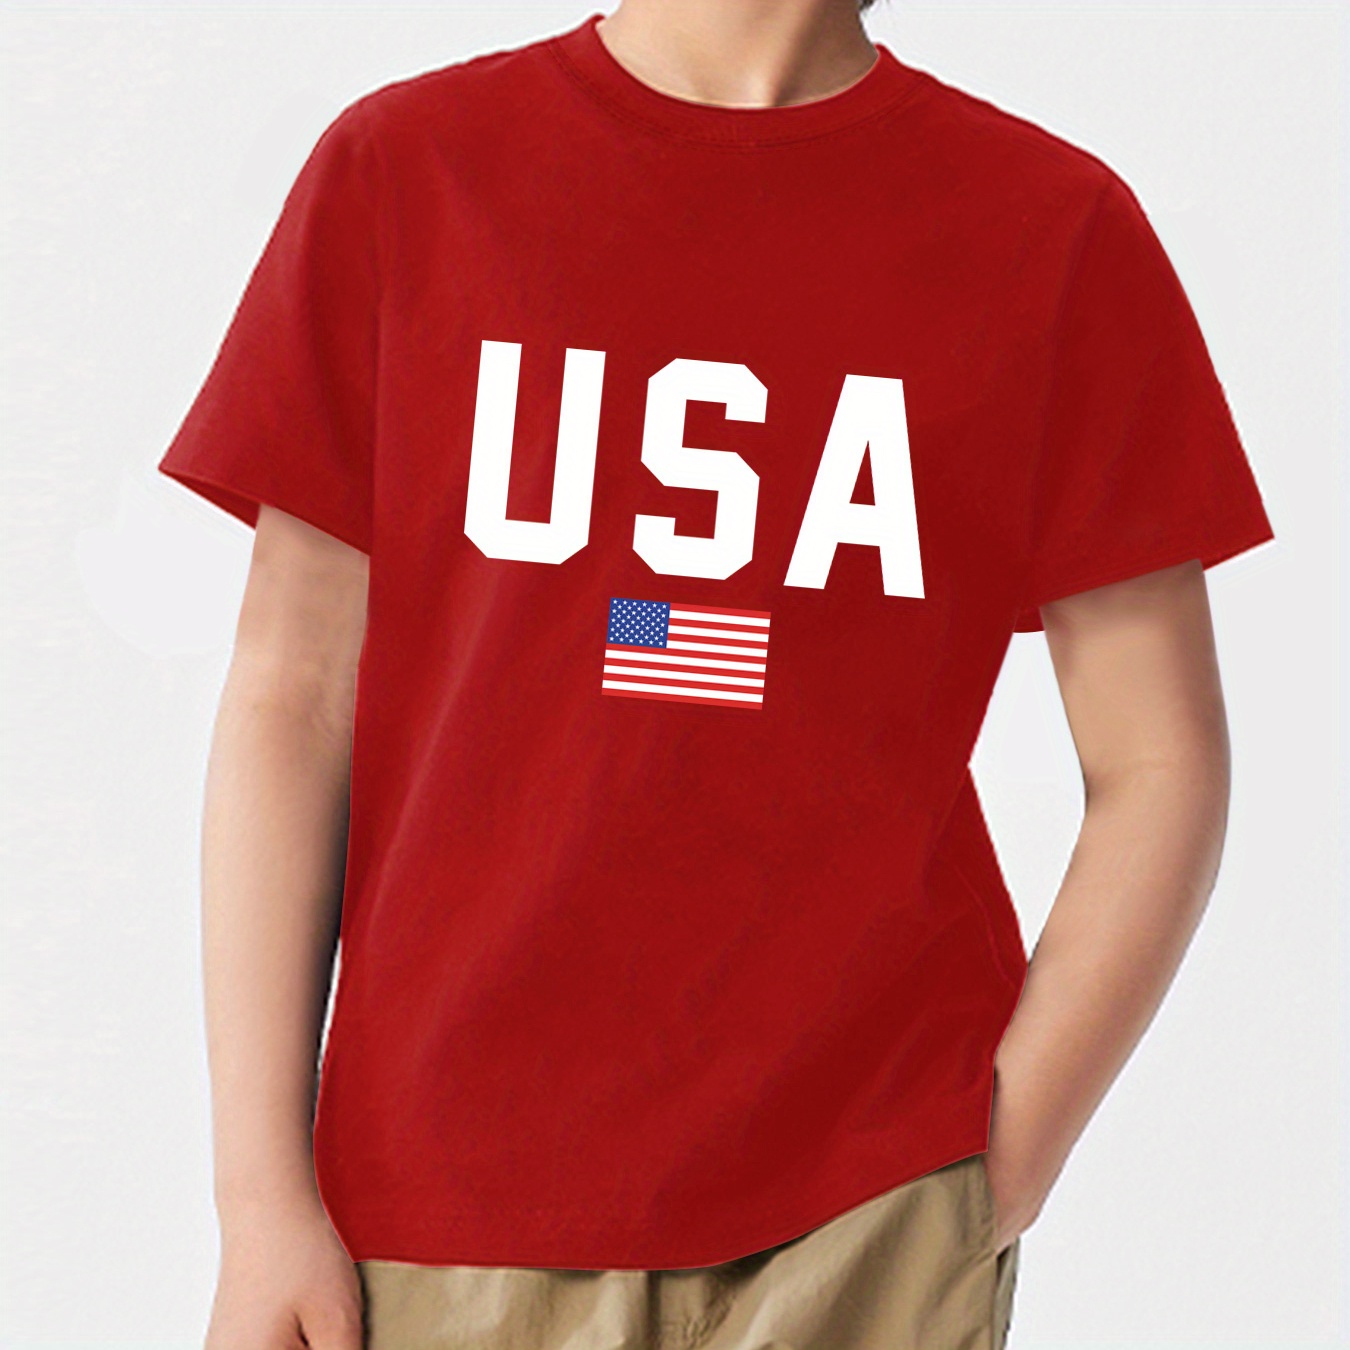 

100% Cotton Usa Print Flag Pattern Short Sleeve Crew Neck T-shirt, Casual Loose Fit Breathable Tee Tops Independence Day Wear Summer Gift, Boys' Clothing